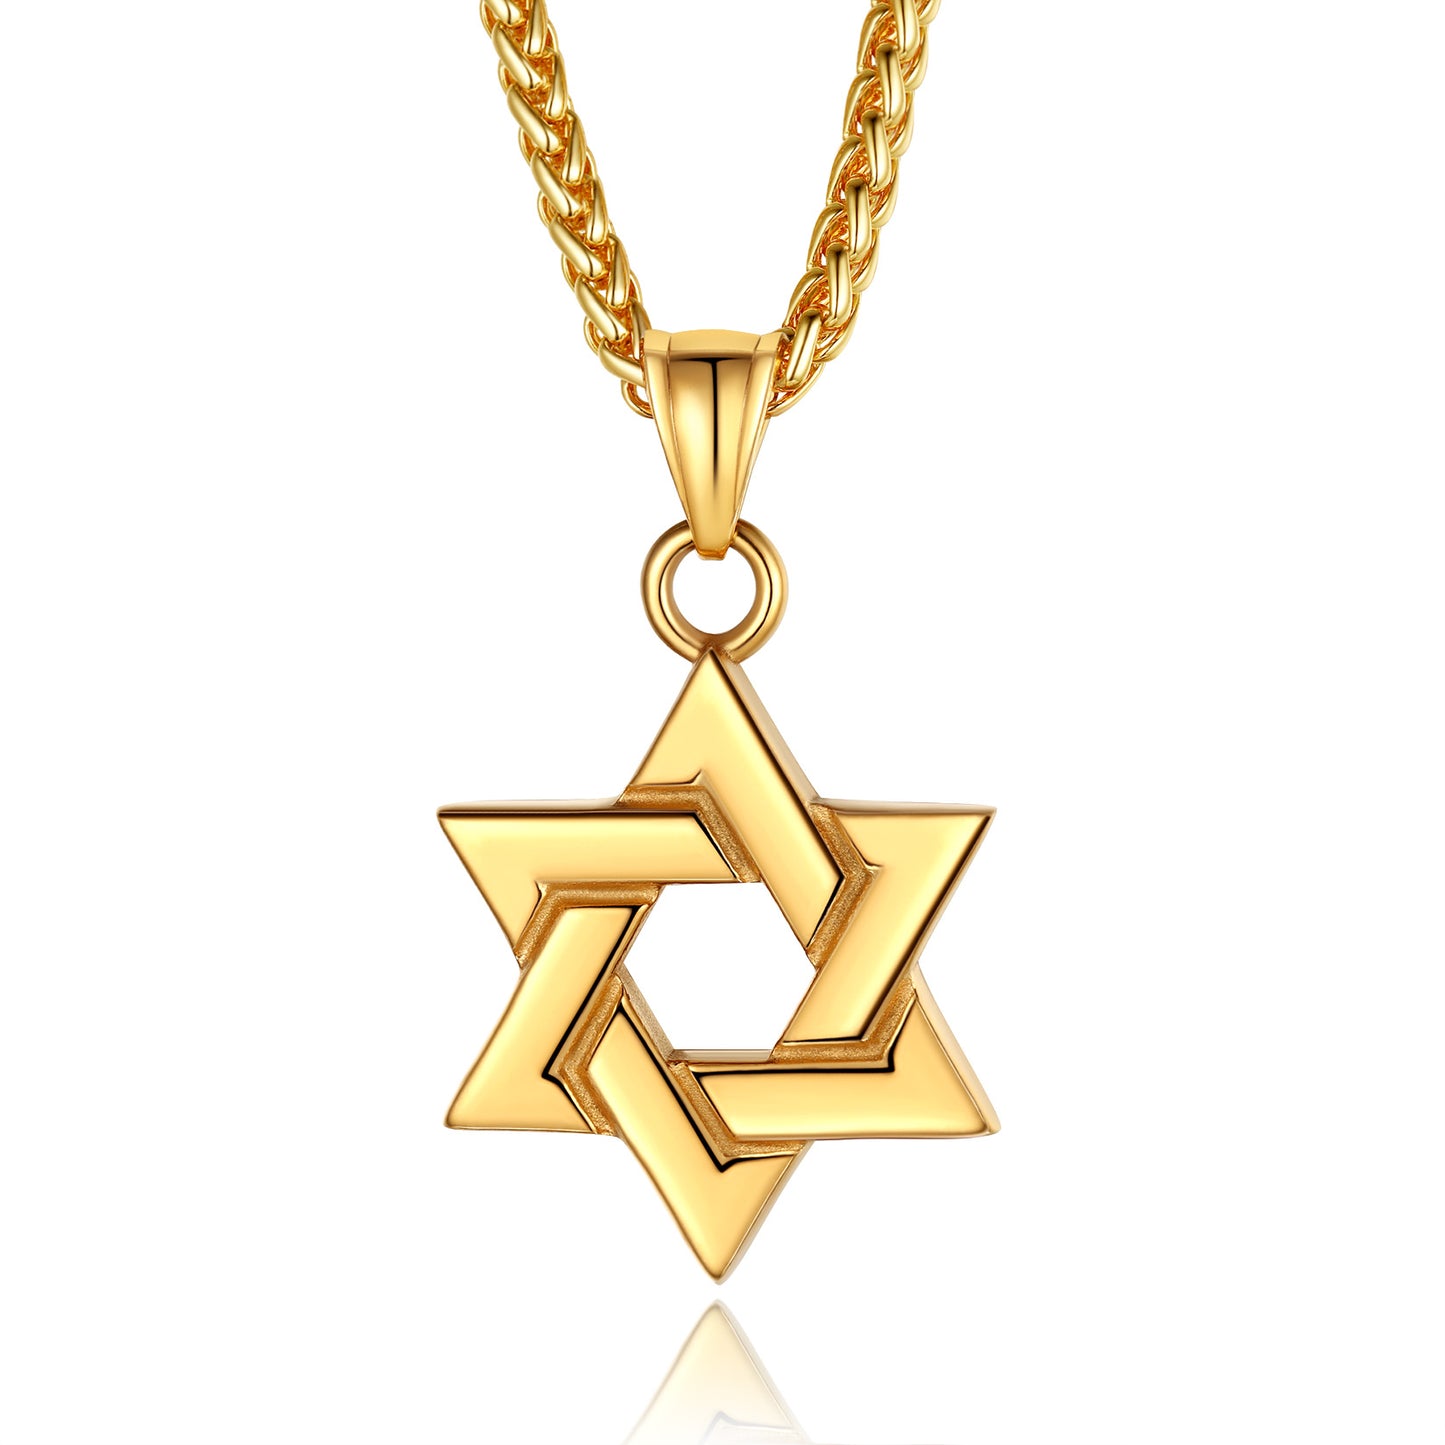 Black Jewish Necklace Stainless Steel Chain Star of David Pendant